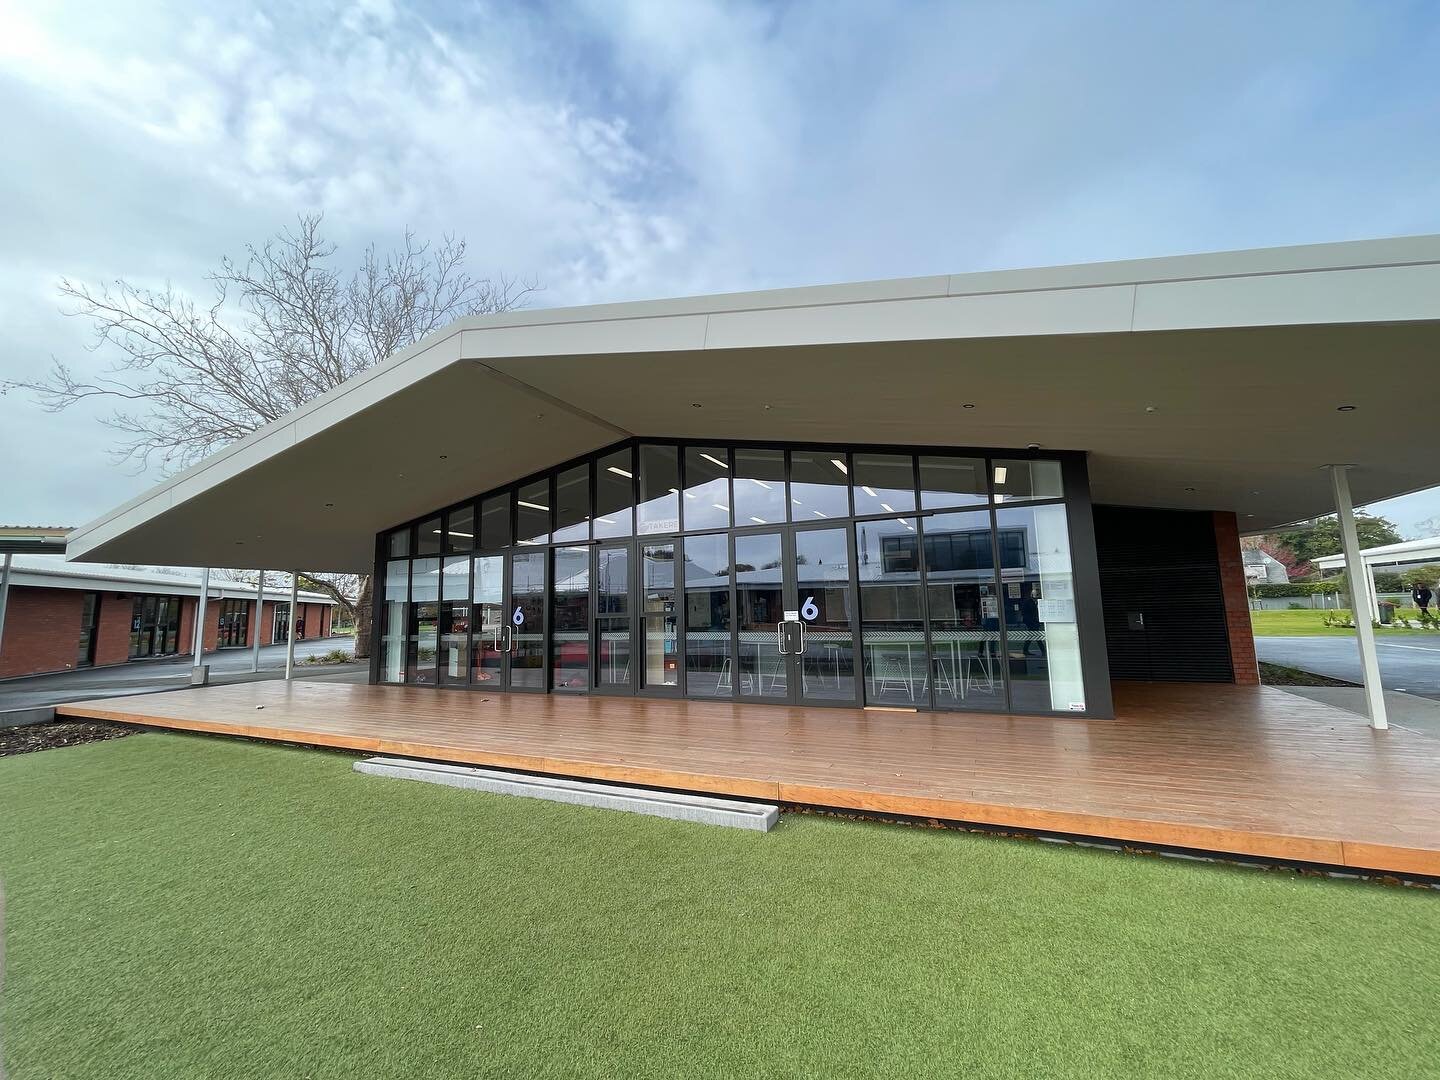 Today we toured the Cobham School rebuild which integrated collaborative learning, practical learning and explicit teaching models. It&rsquo;s wonderful to see schools with so much open space! #LEA23 @le_aust 
.
.
#schoolarchitecture #educationdesign